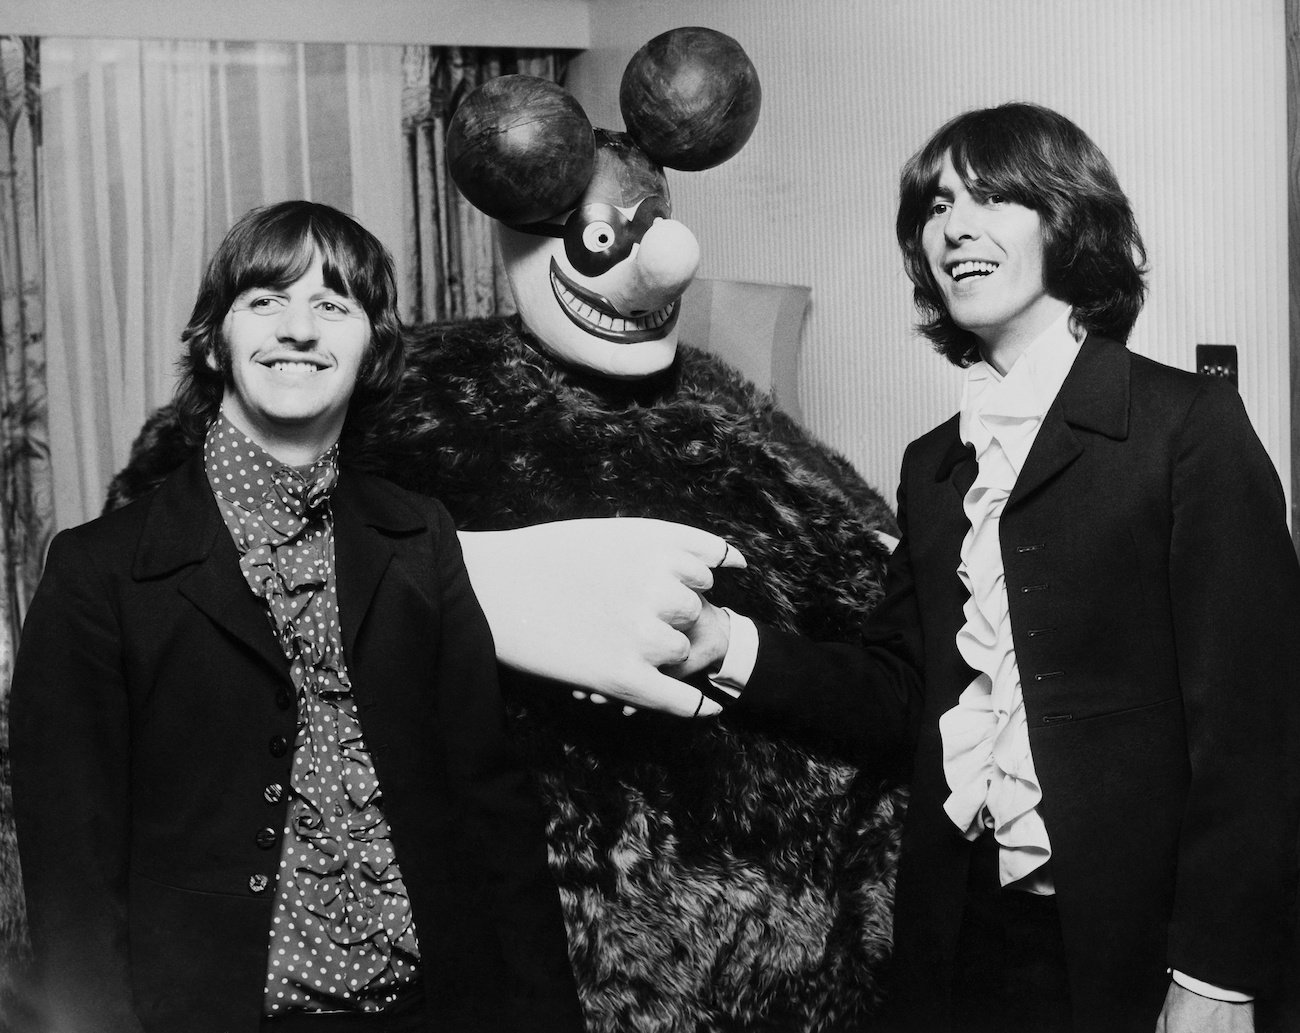 Ringo Starr and George Harrison at the presentation of The Beatles' 'Yellow Submarine' in 1968.